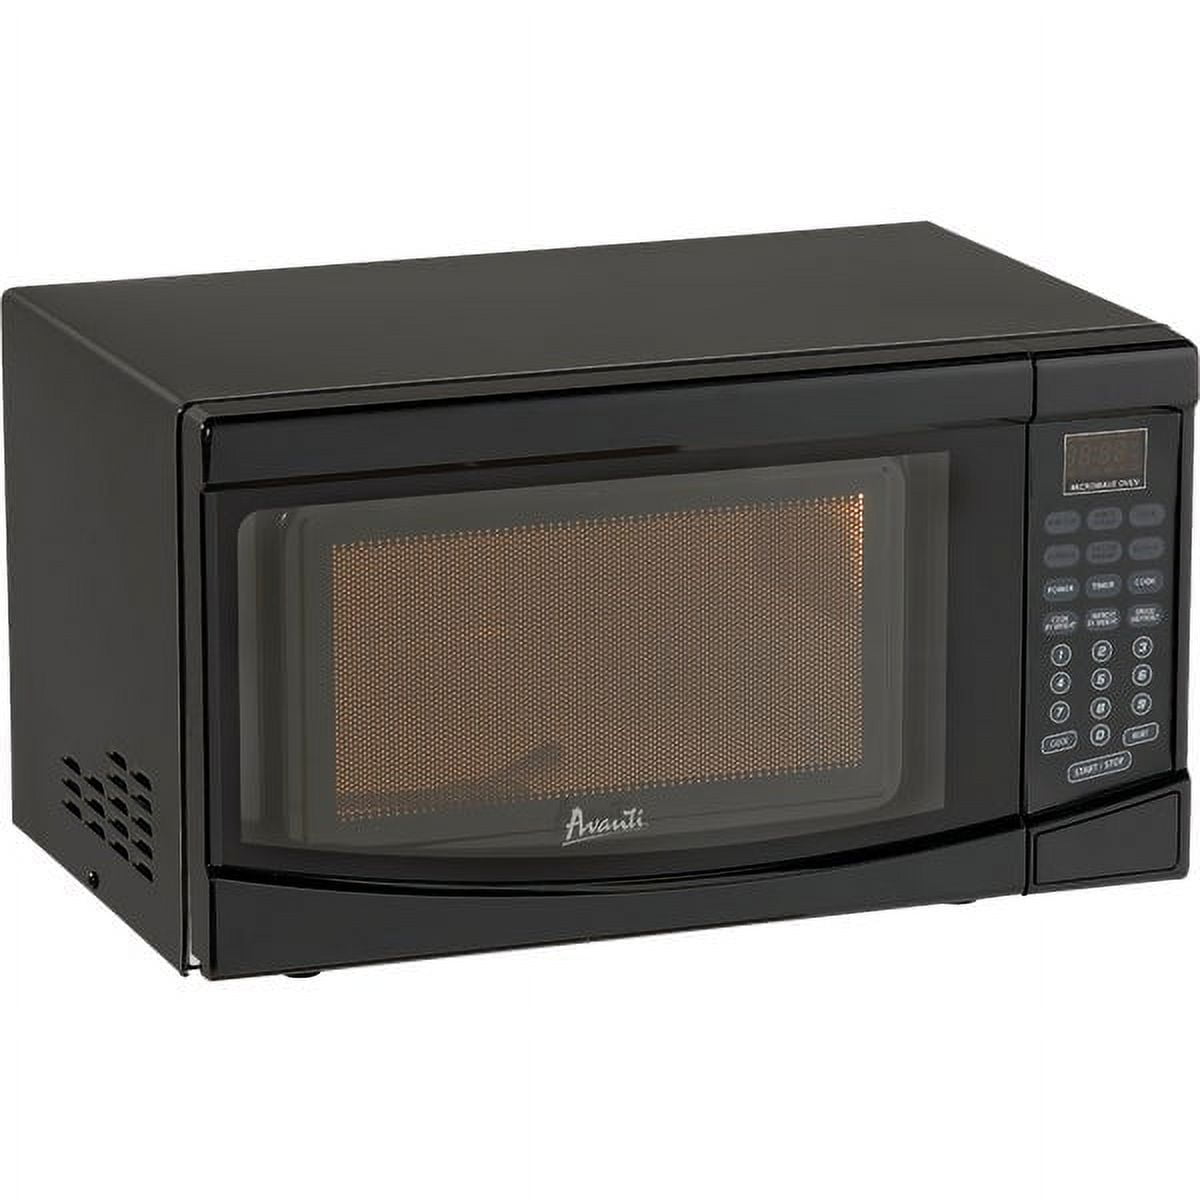 COMFEE' Retro Small Microwave Oven W Compact Size 9 Preset Menus,  Position-Memory Turntable Mute Function, Countertop Microwave Perfect For  Small Spaces 0.7 Cu Ft/700W Cream AM720C2RA-A Retro Apricot 